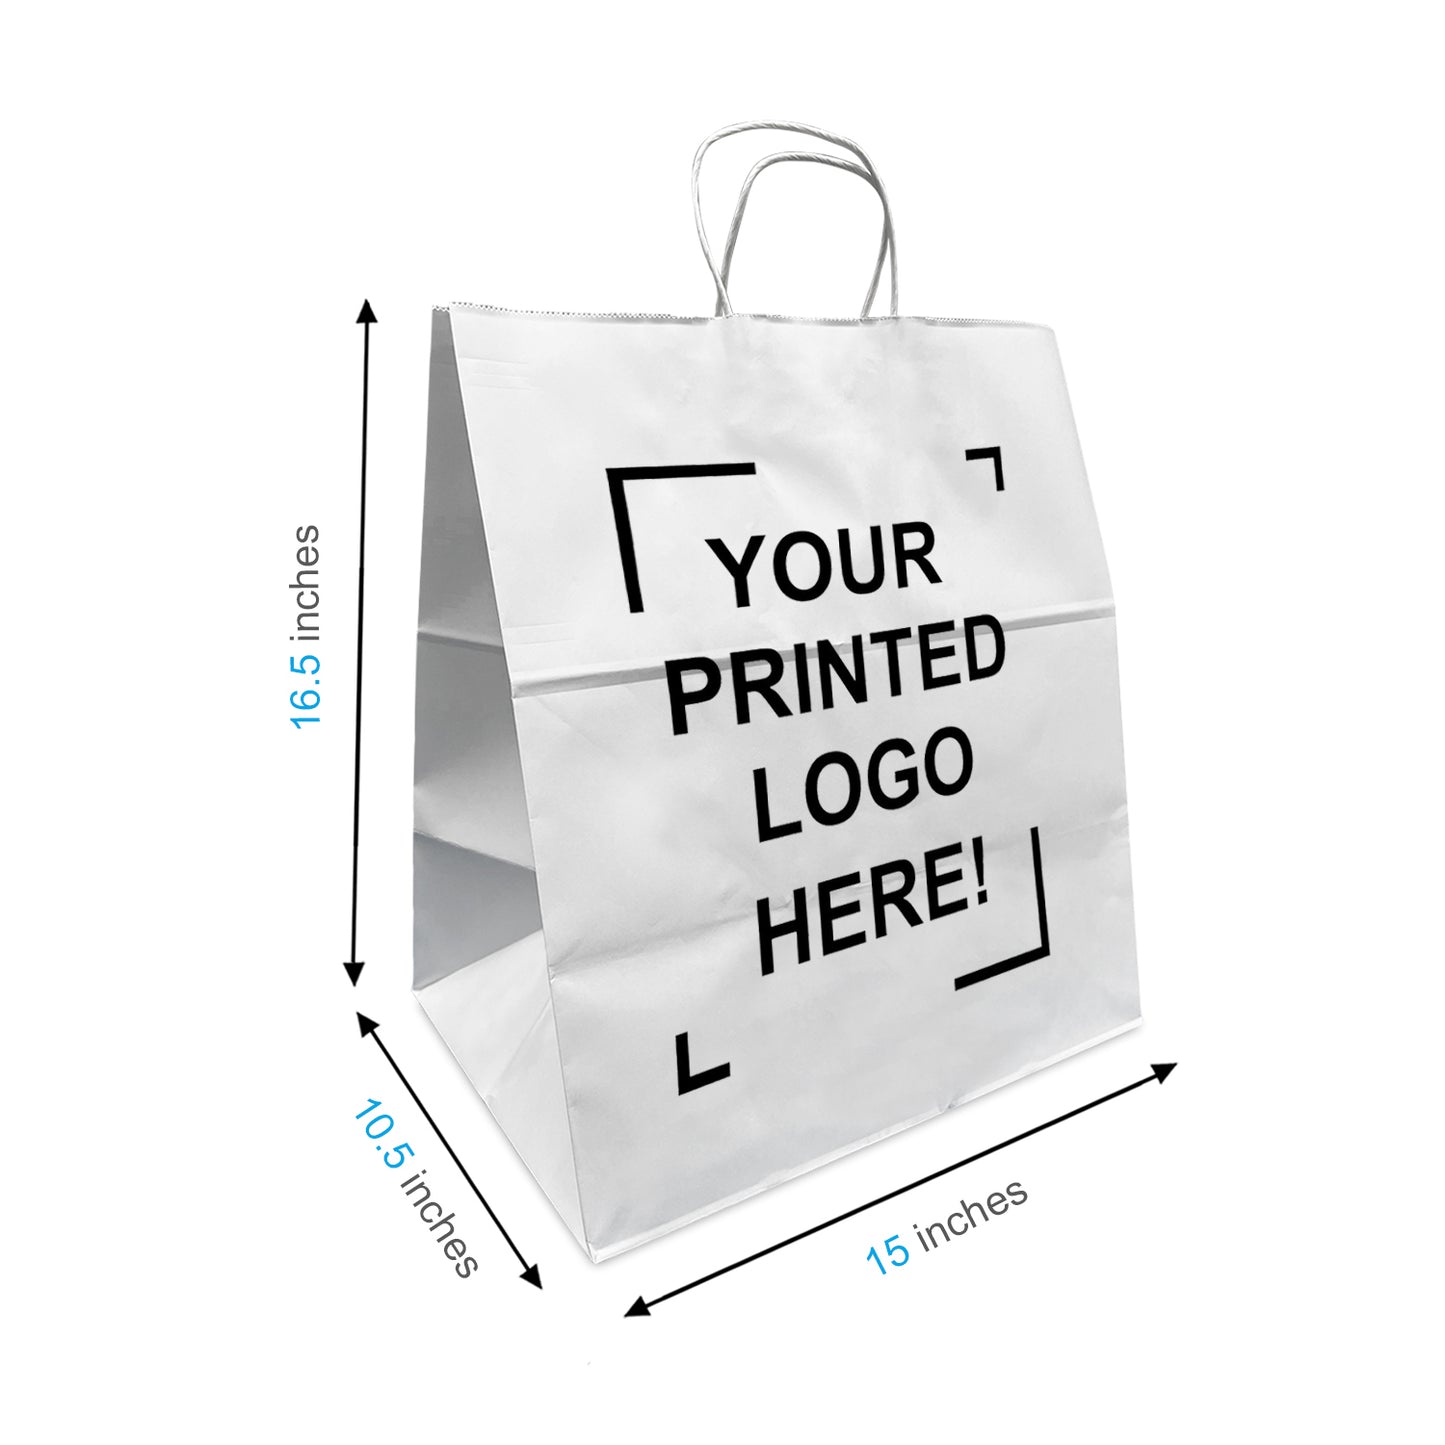 200 Pcs, Dumbo, 15x10.5x16.5 inches, White Kraft Paper Bags, with Twisted Handle, Full Color Custom Print